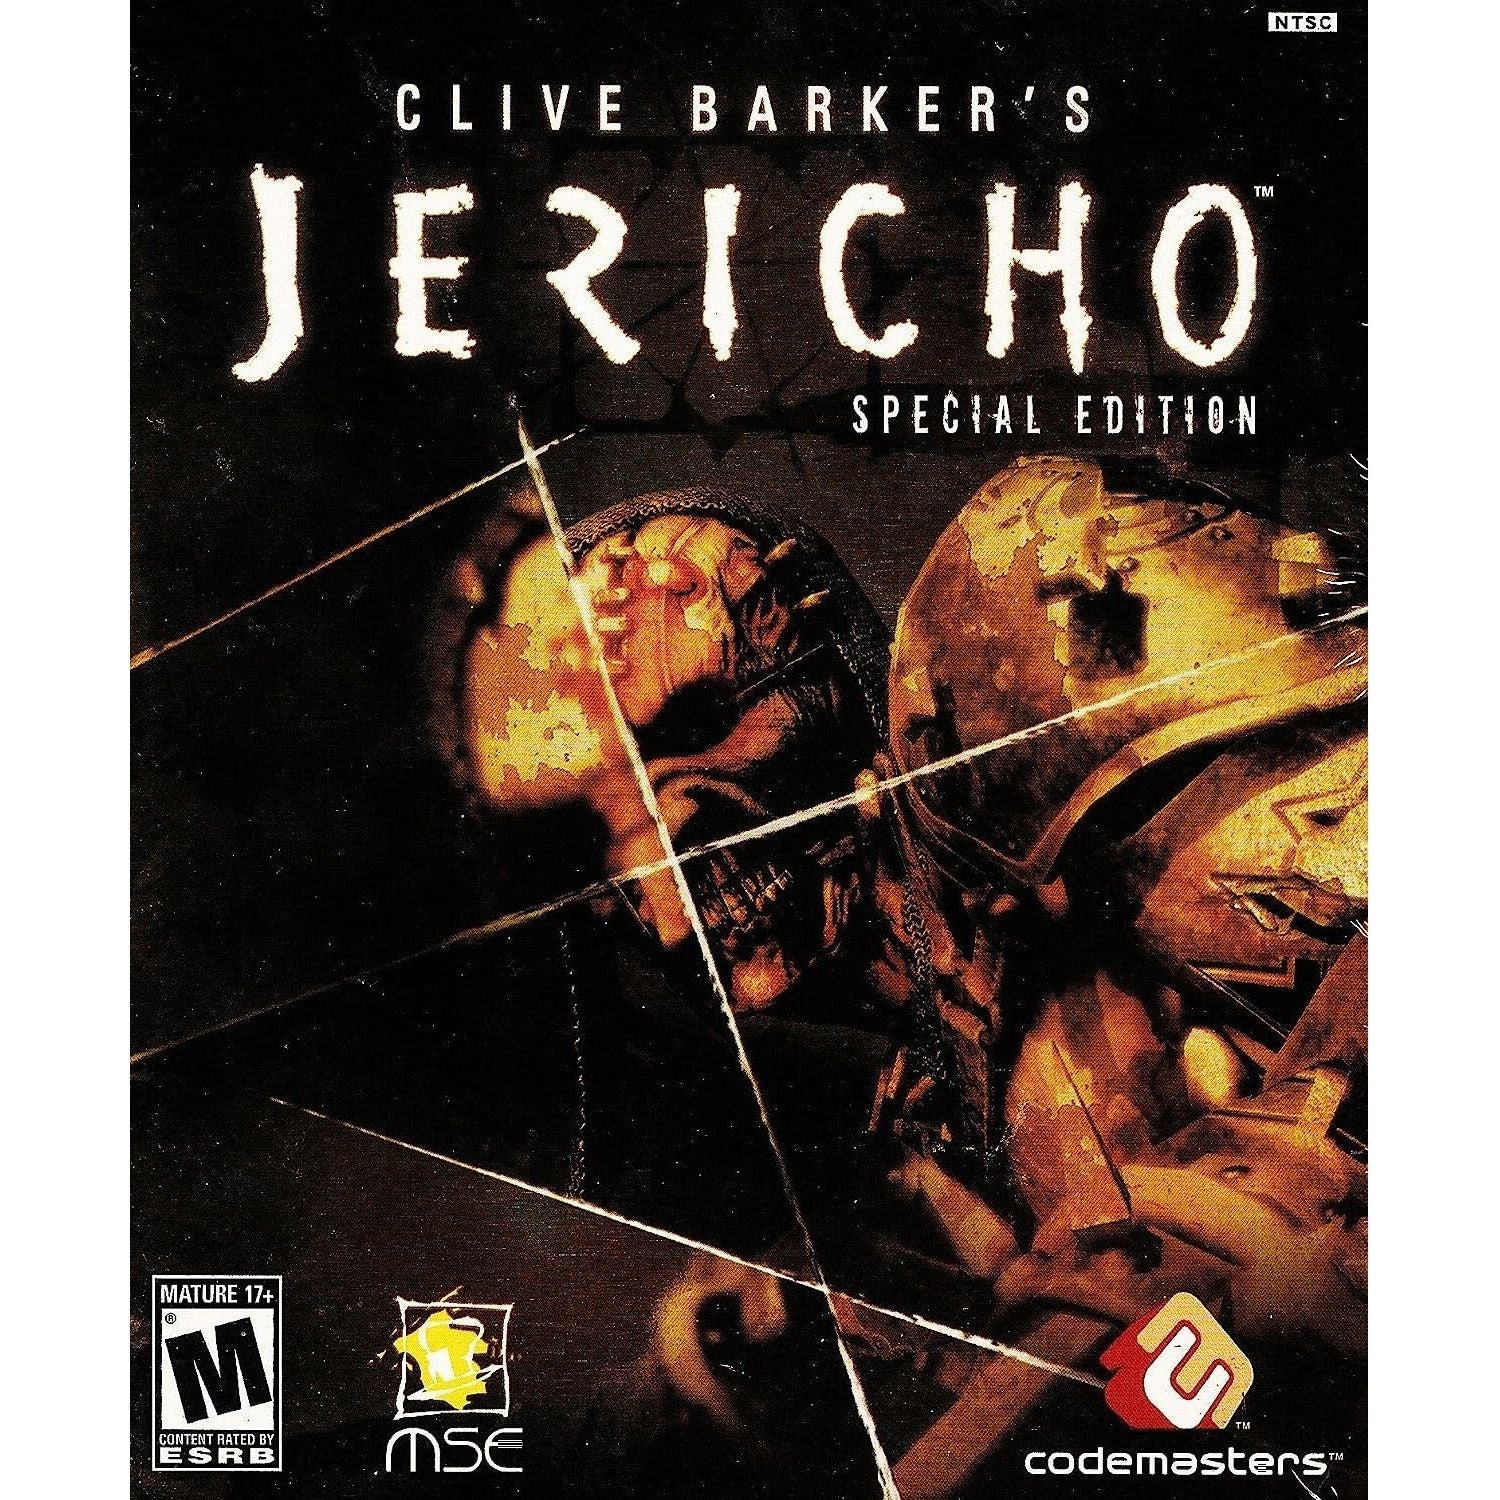 XBOX 360 - Clive Barker's Jericho Special Edition